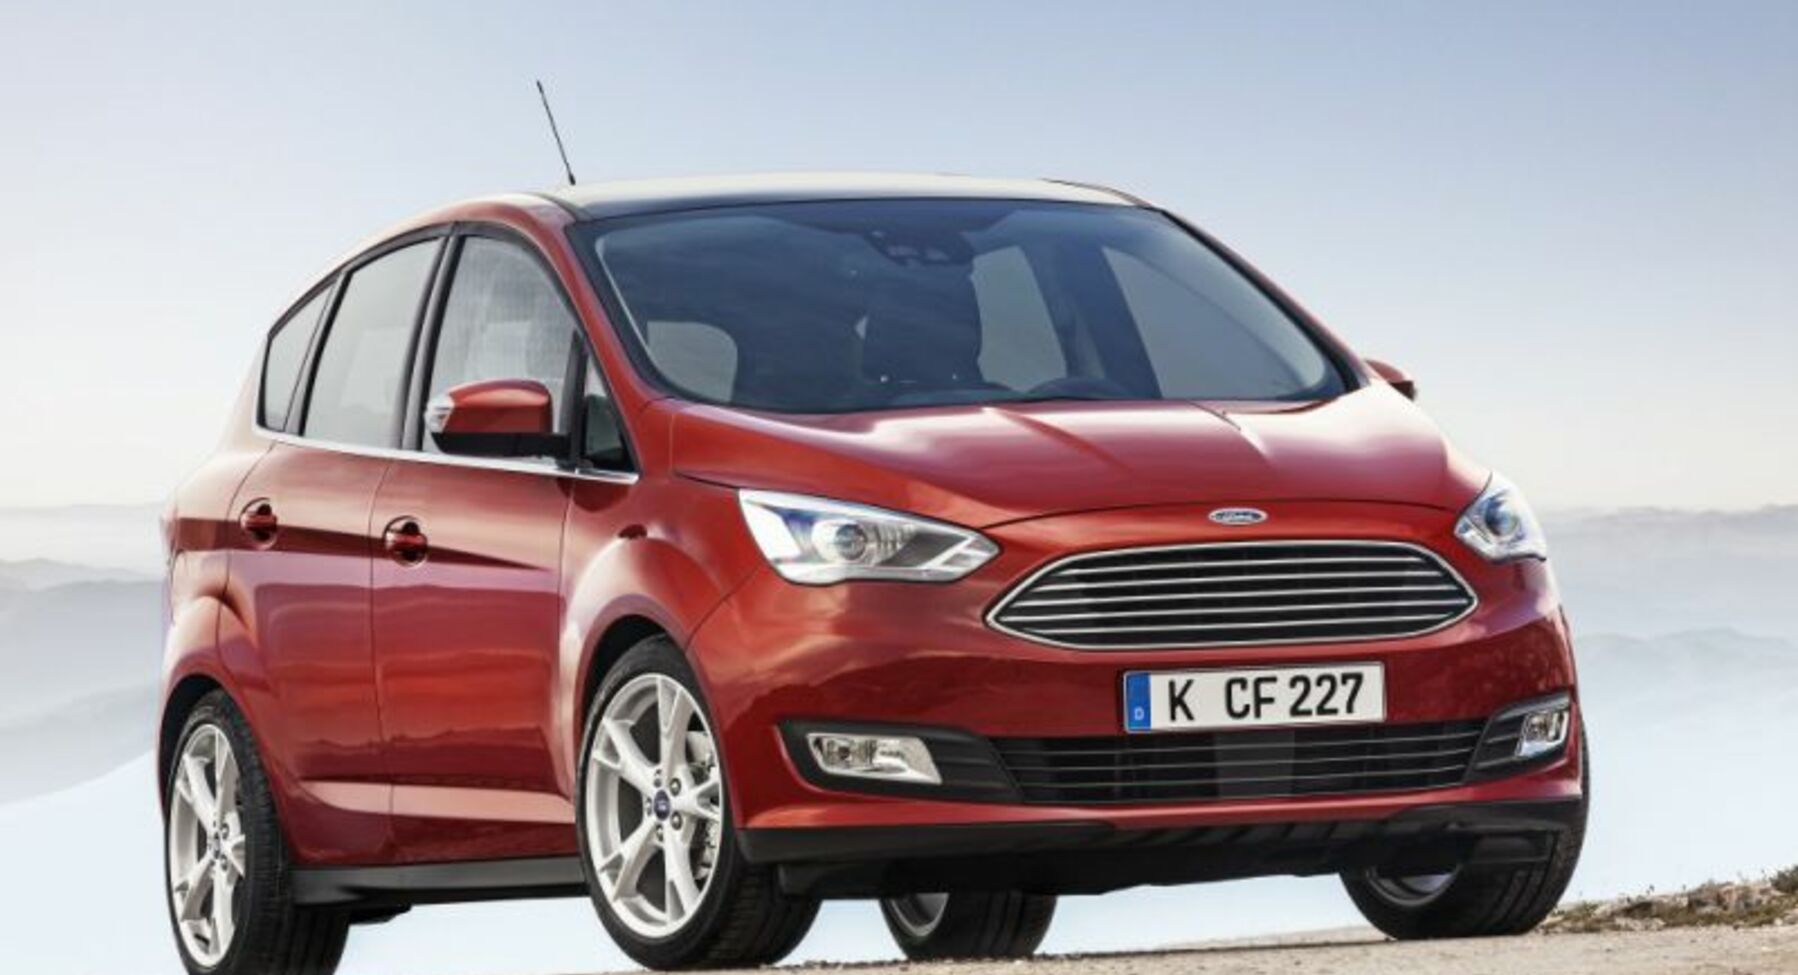 Ford C-MAX II (facelift 2015) 1.5 EcoBoost (150 Hp) PowerShift S&S 2015, 2016, 2017, 2018, 2019, 2020, 2021 